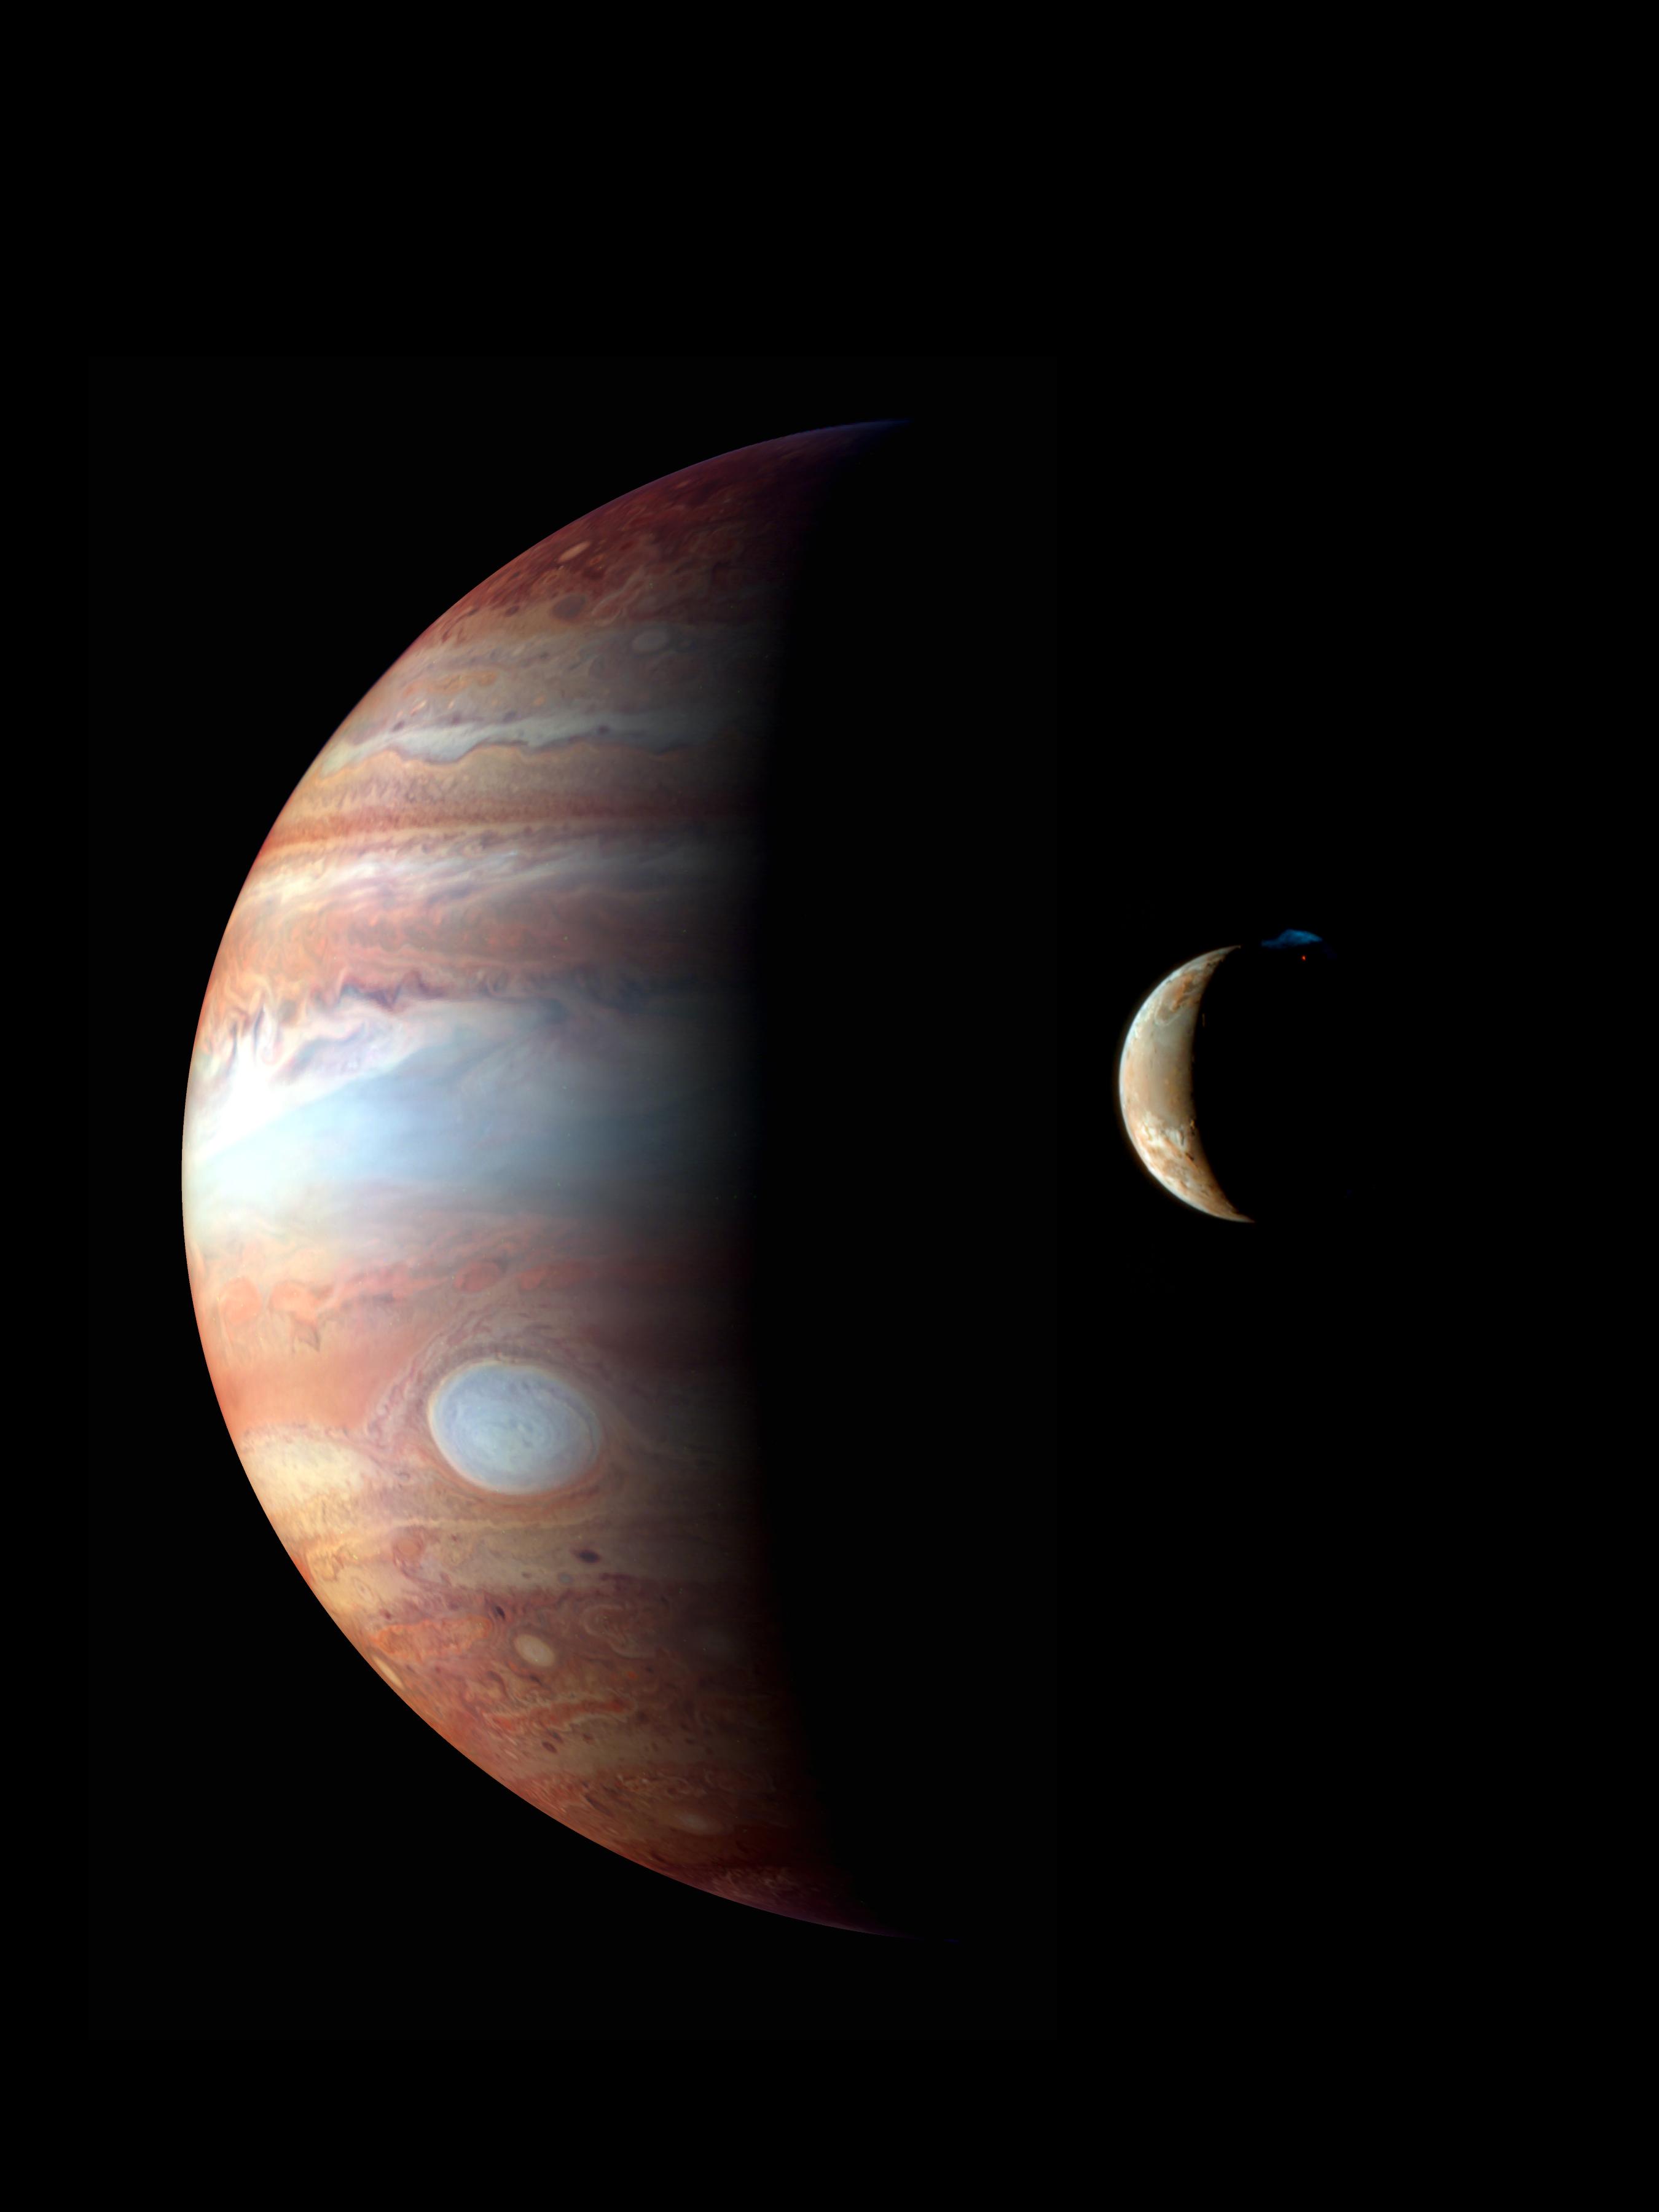 Giant Jupiter is half illuminated by the Sun and its moon Io is a crescent in the foreground. A small glowing volcanic plume is erupting from Io.